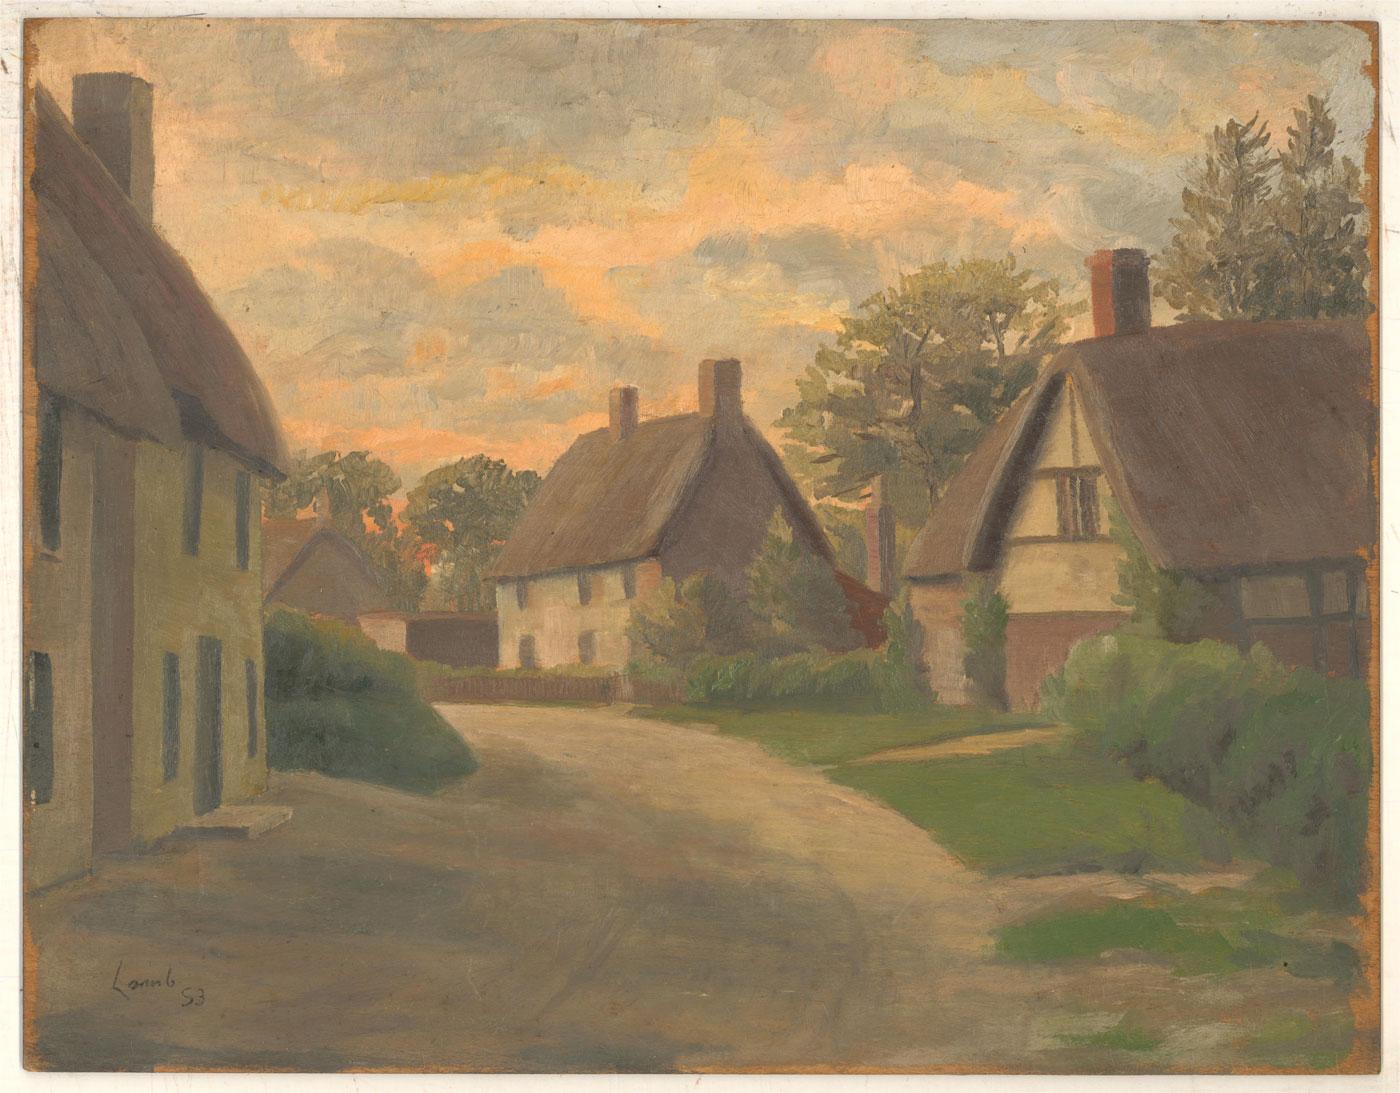 A truly idyllic rural scene in oil, showing a curving road with pretty thatched cottages either side under a blushing sunset. The painting is by the renowned British painter, Henry Lamb, an associate of the Bloomsbury Group. The painting captures